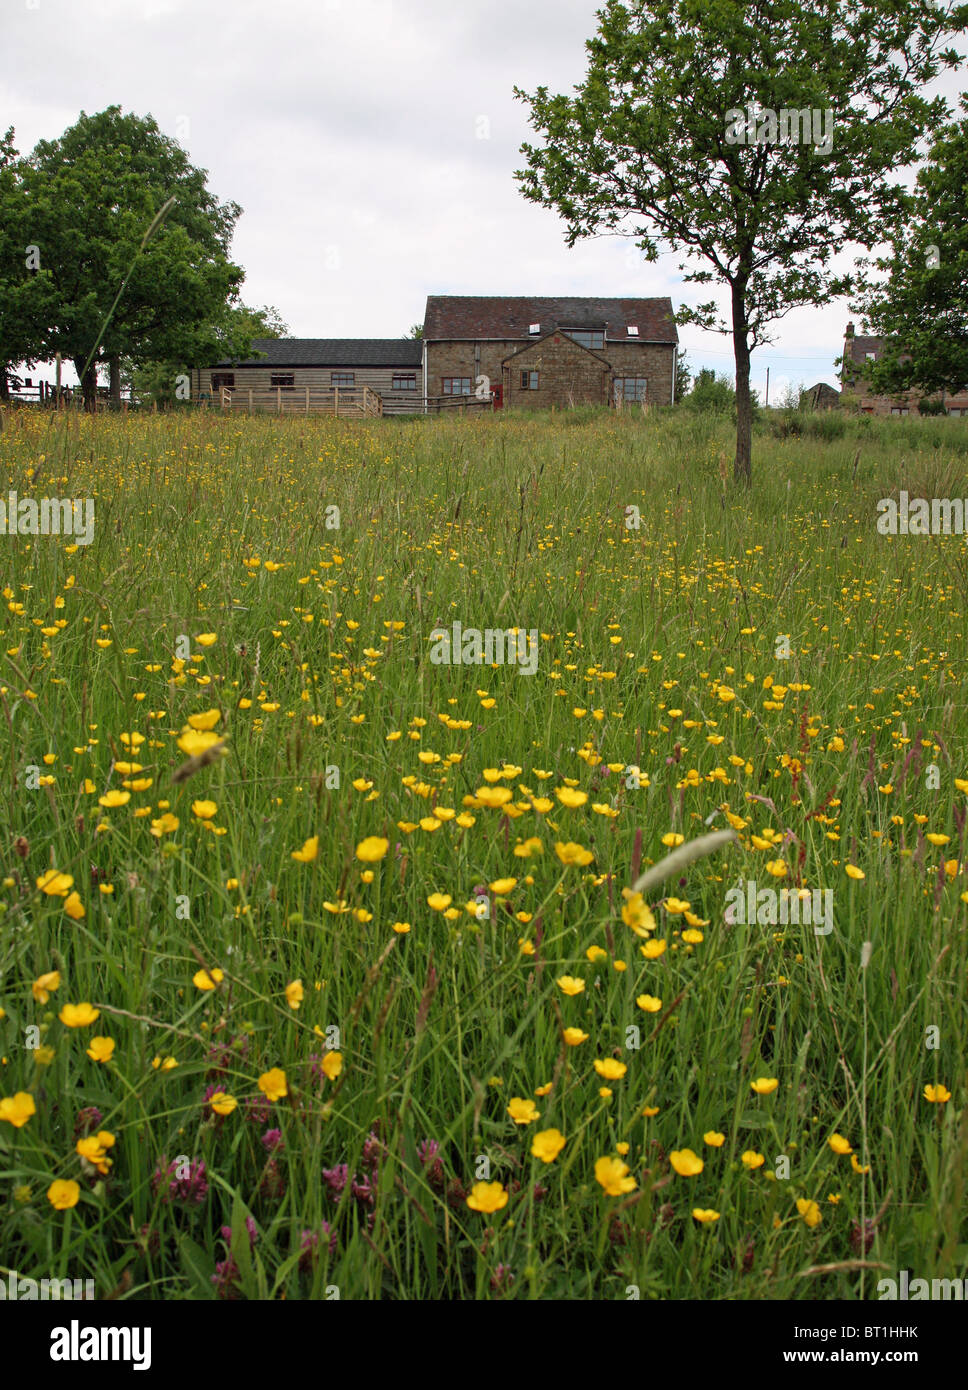 Coombes Valley visitor centre with a buttercup field  in the foreground Leek Staffordshire England UK United Kingdom GB Stock Photo